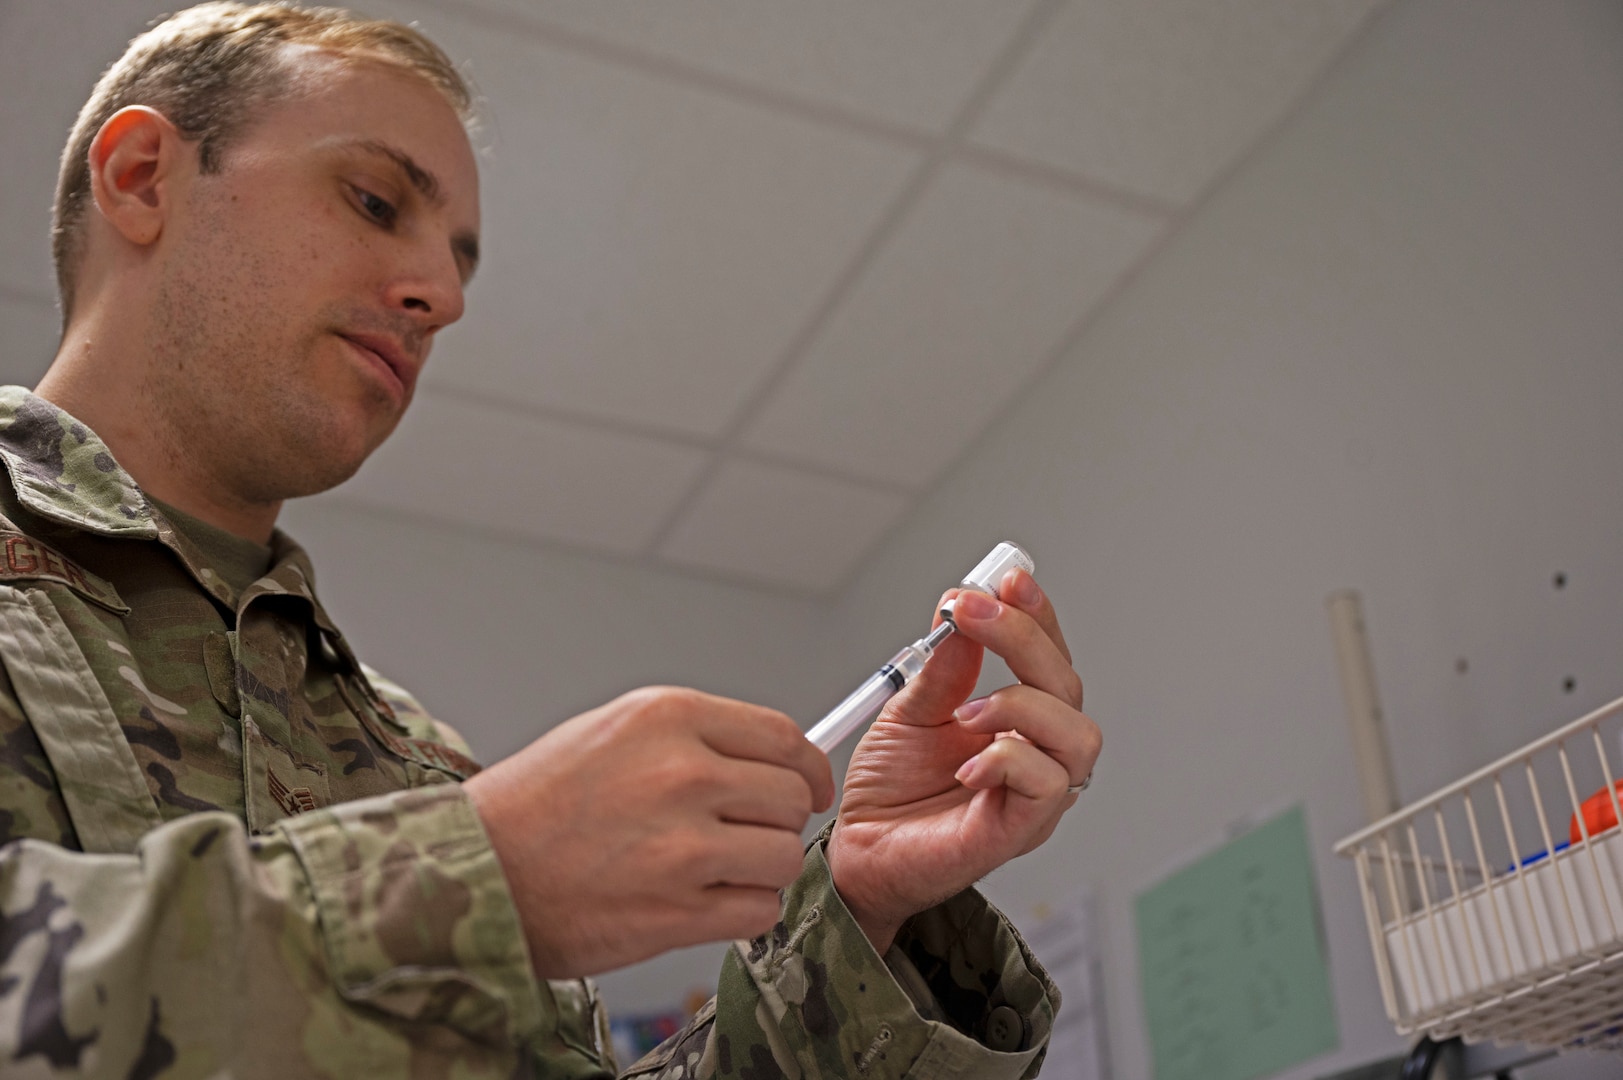 U.S. Air Force Staff Sgt. Joseph Holweger, 86th Medical Group non-commissioned officer in charge of the Immunizations Clinic, prepares a vaccine at Ramstein Air Base Germany, Aug. 18, 2022. Holweger and the rest of his team at the immunizations Clinic on base are prepared to issue the Novavax vaccine to those interested. (U.S. Air Force photo by Senior Airman Thomas Karol)